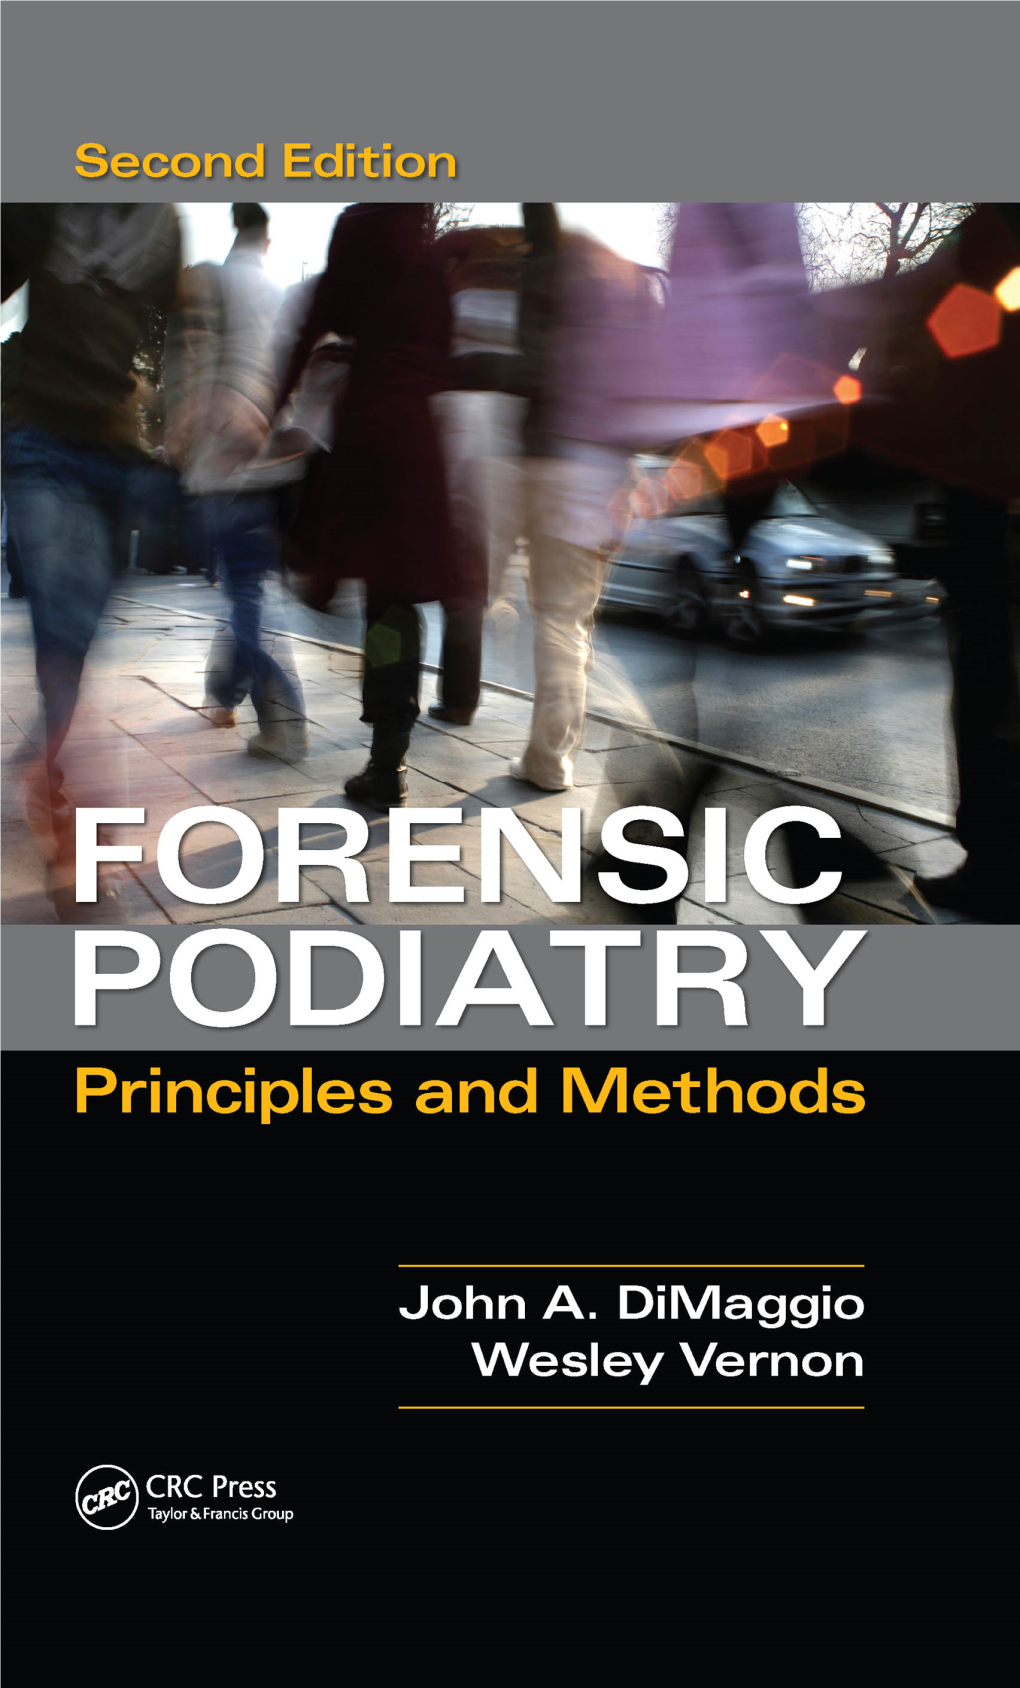 FORENSIC PODIATRY Principles and Methods